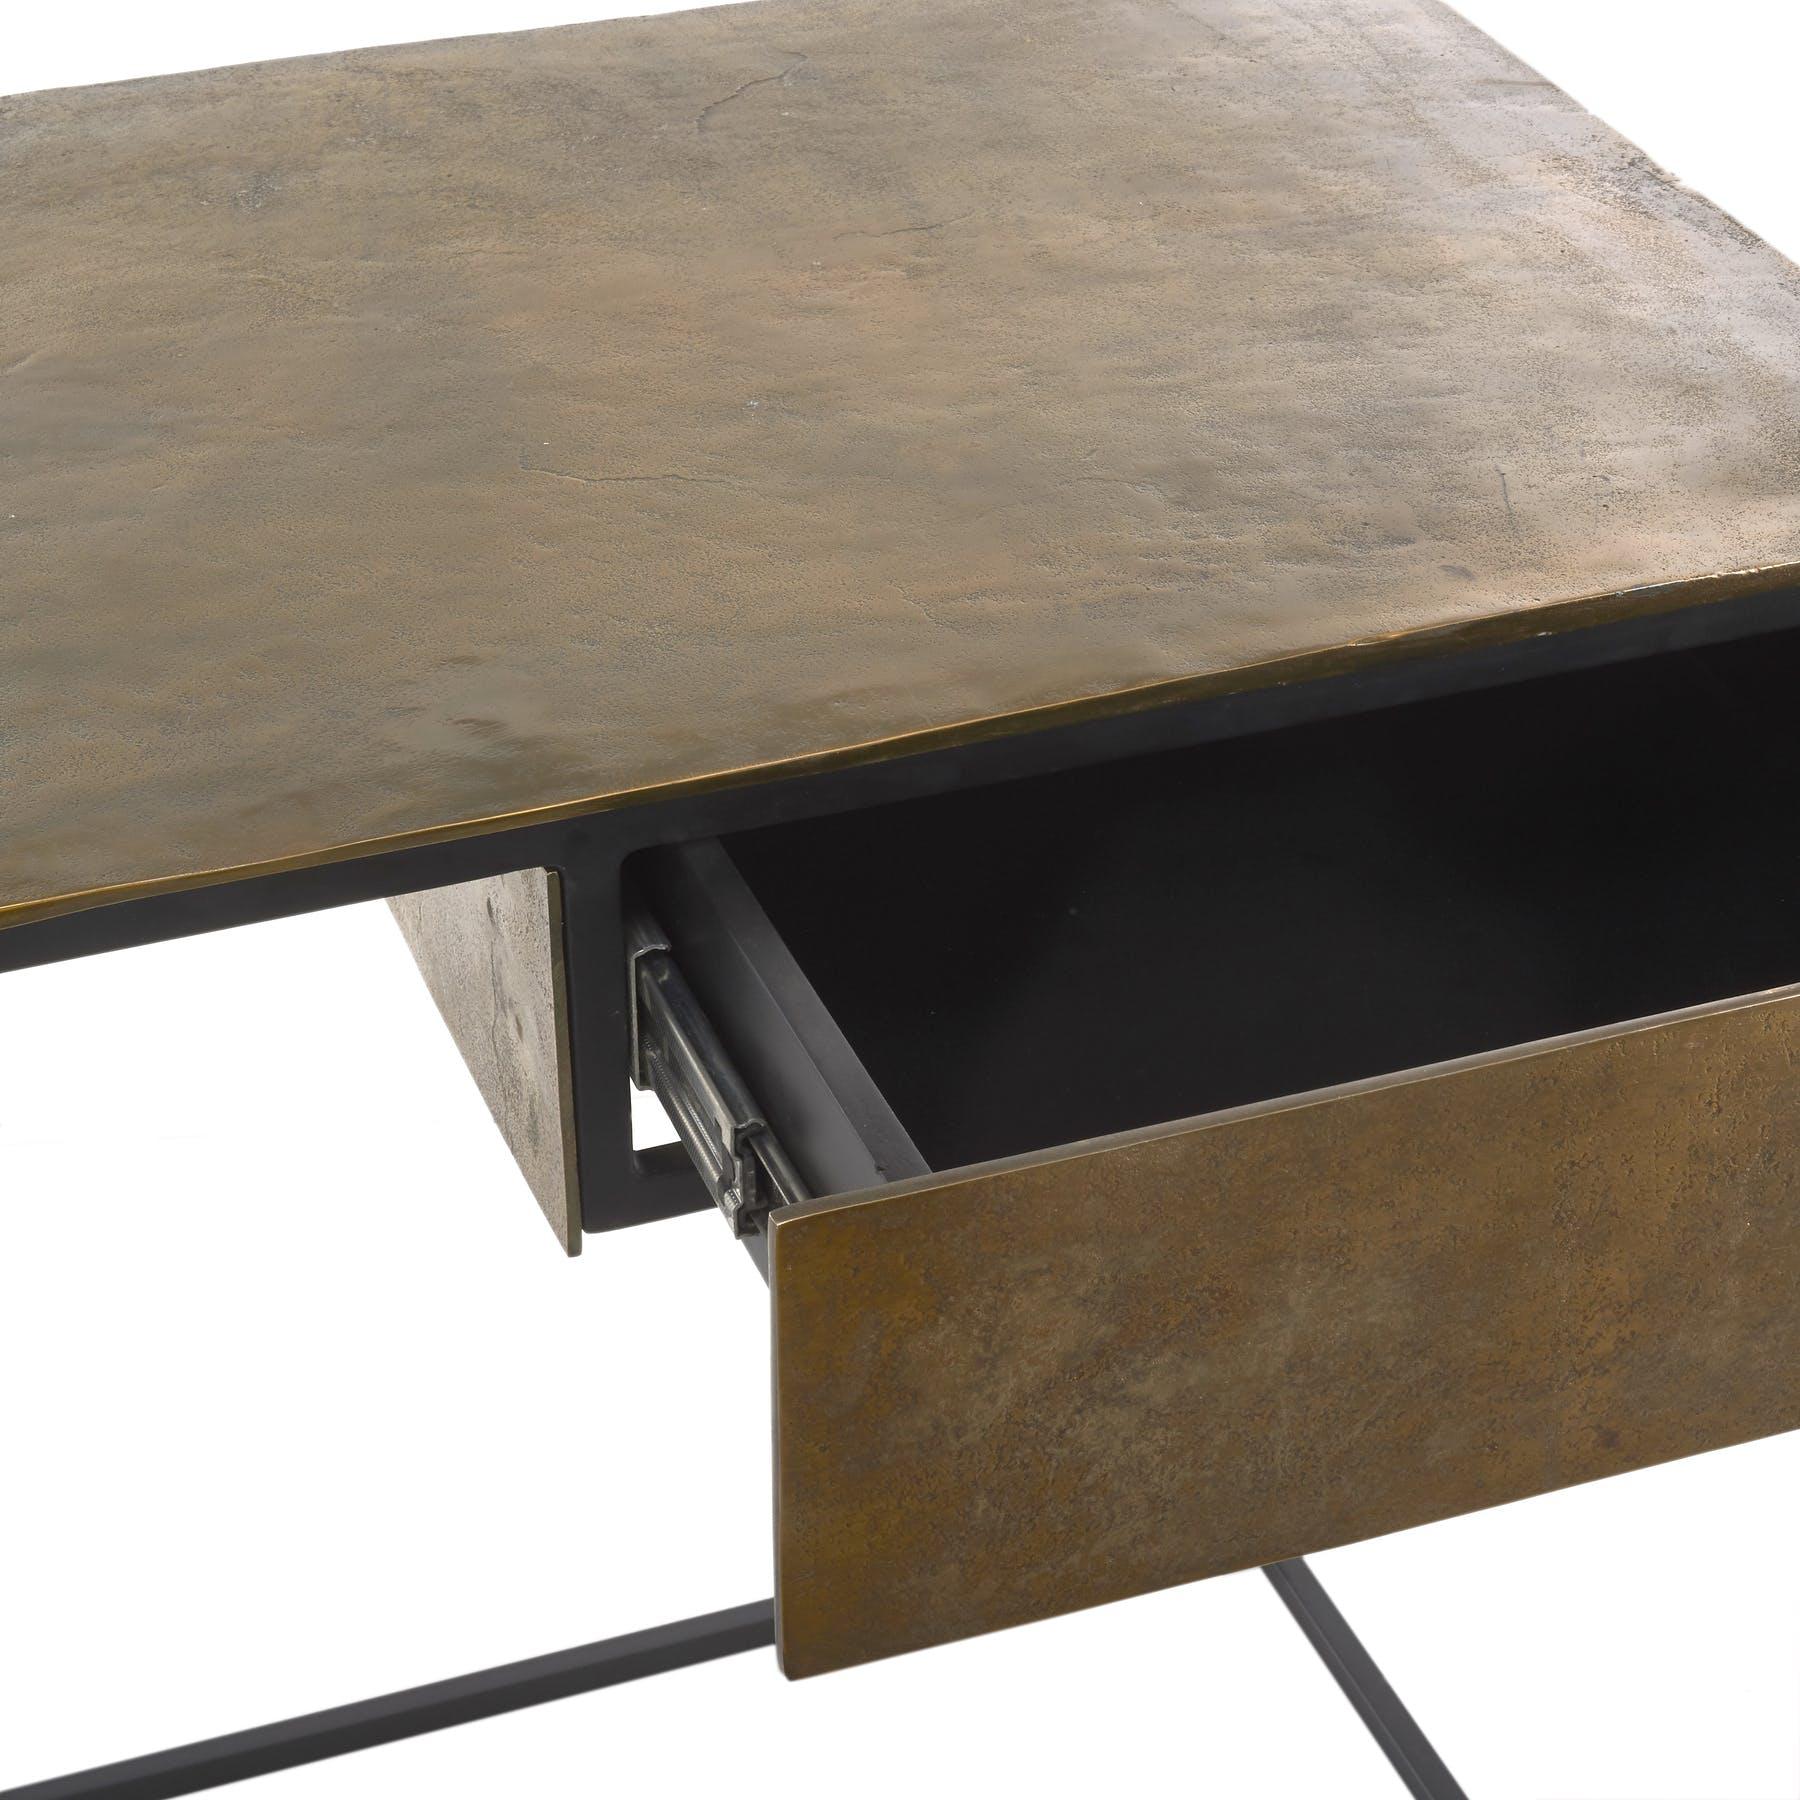 Antique brass plated desk, Pols Potten Studio.
Dimensions: W 120.5 x D 51 x H 75.5 cm.
Materials: Black powder coated iron frame, aluminium, antique brass plated top.


Pols Potten products are characterised by a modern twist on Traditional